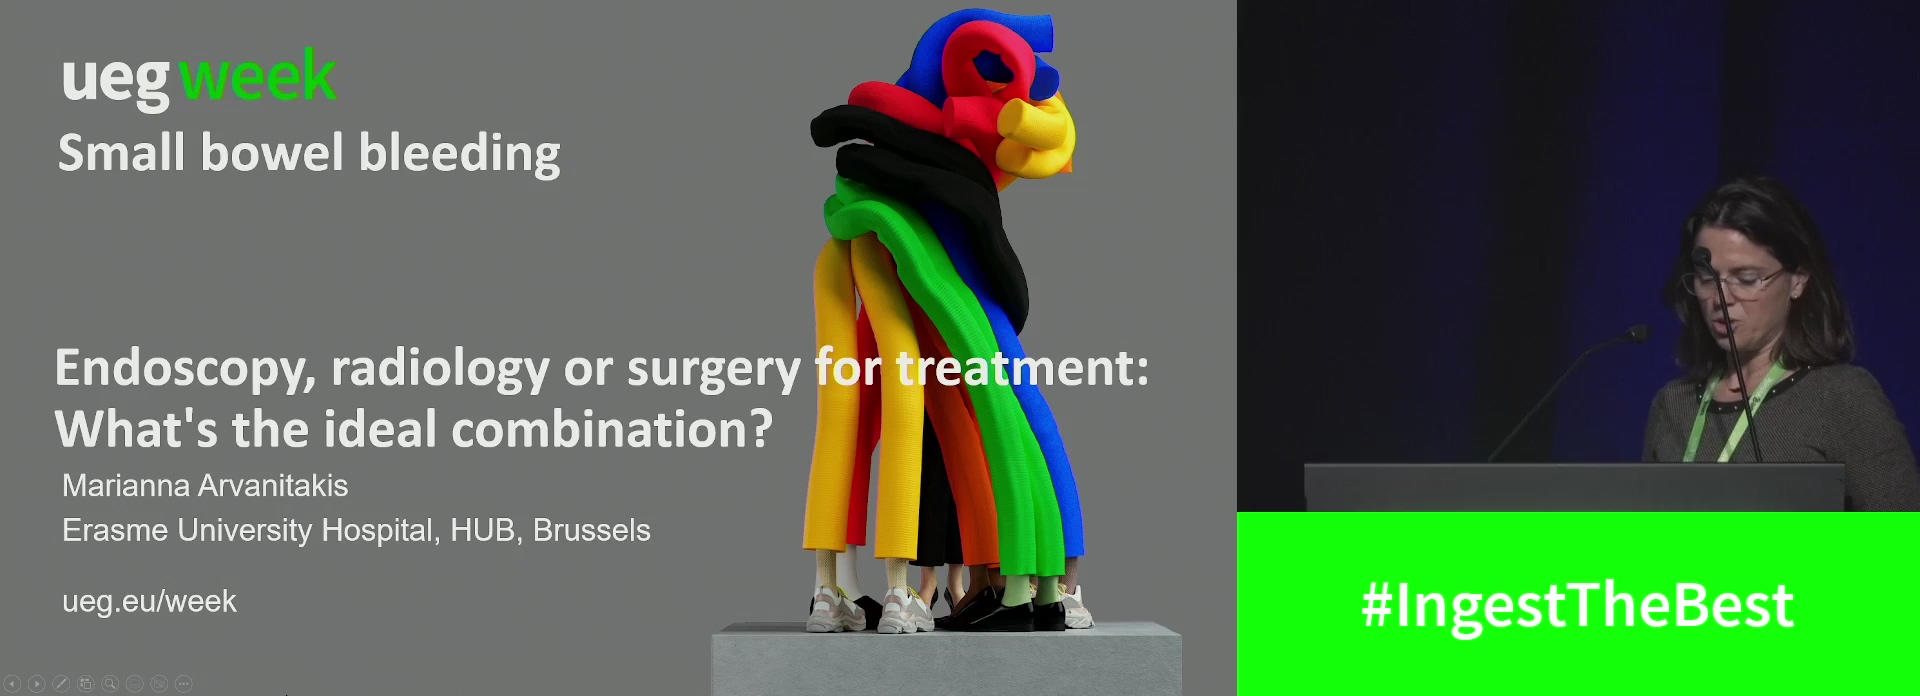 Endoscopy, radiology or surgery for treatment: What's the ideal combination?